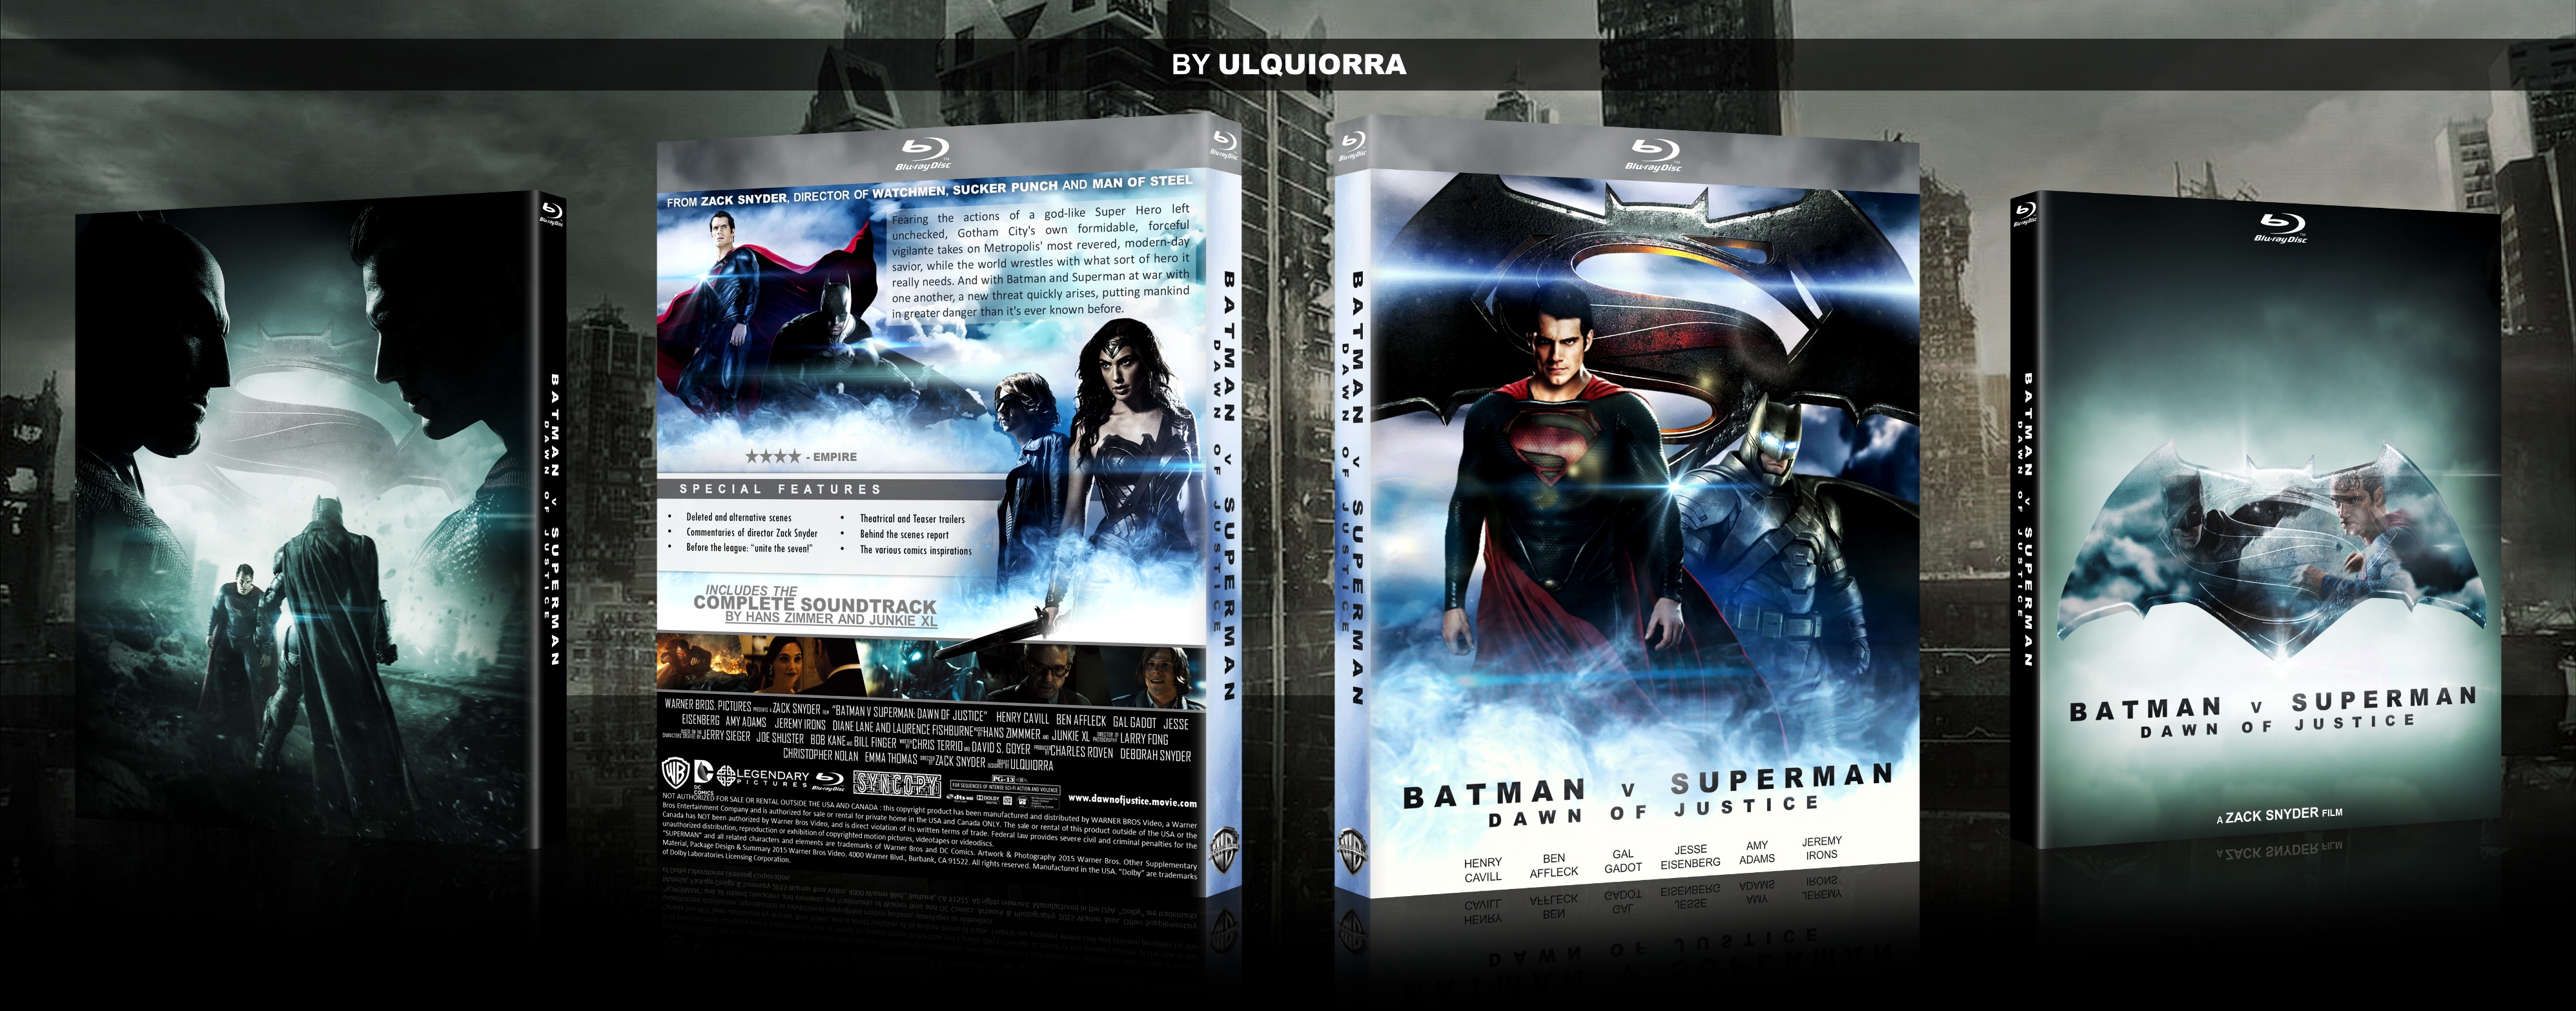 instal the last version for android Batman v Superman: Dawn of Justice